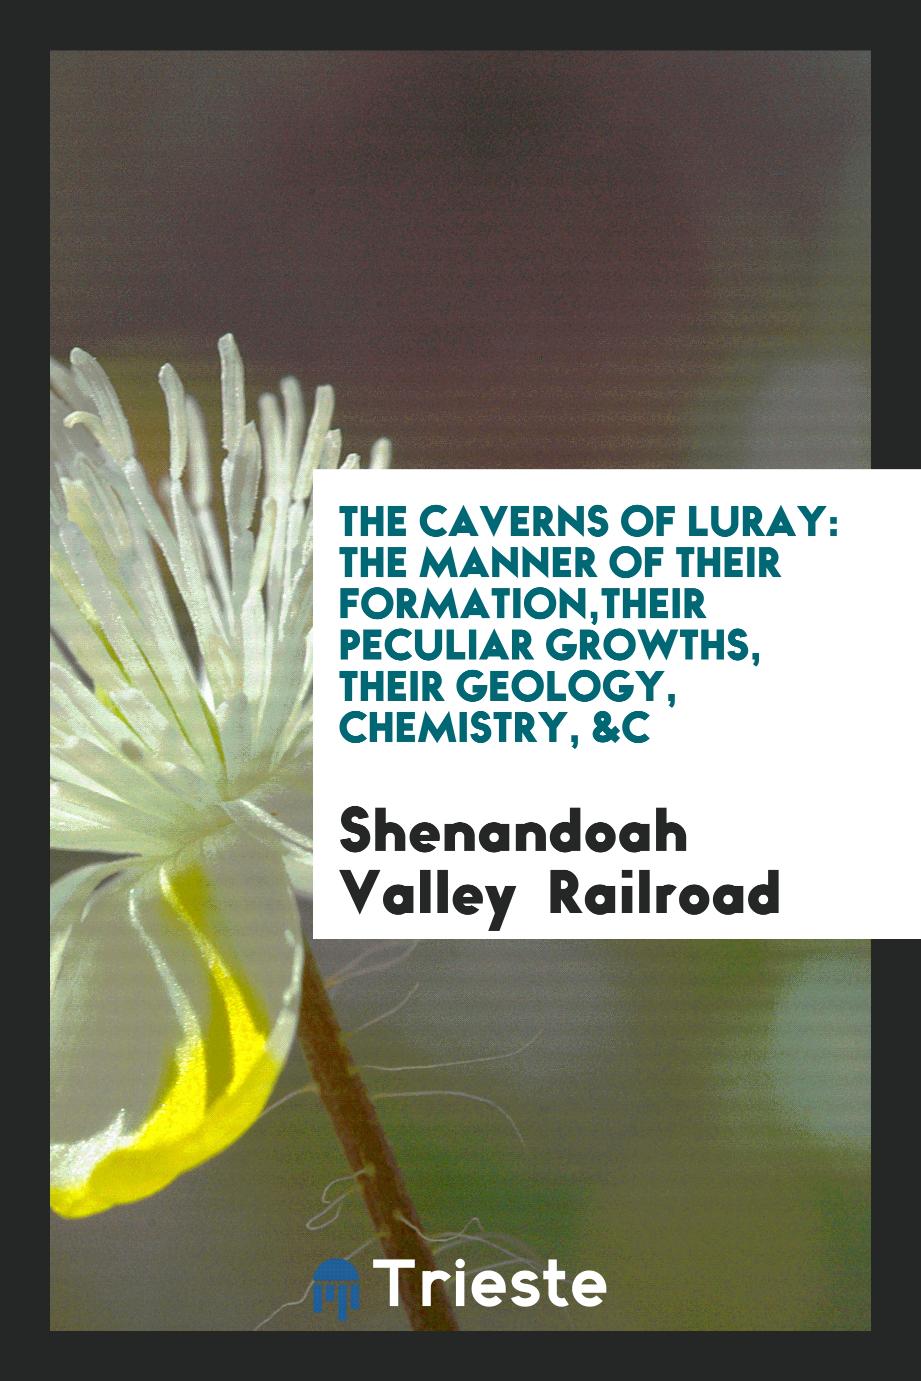 The Caverns of Luray: The Manner of Their Formation,their Peculiar Growths, Their Geology, Chemistry, &c